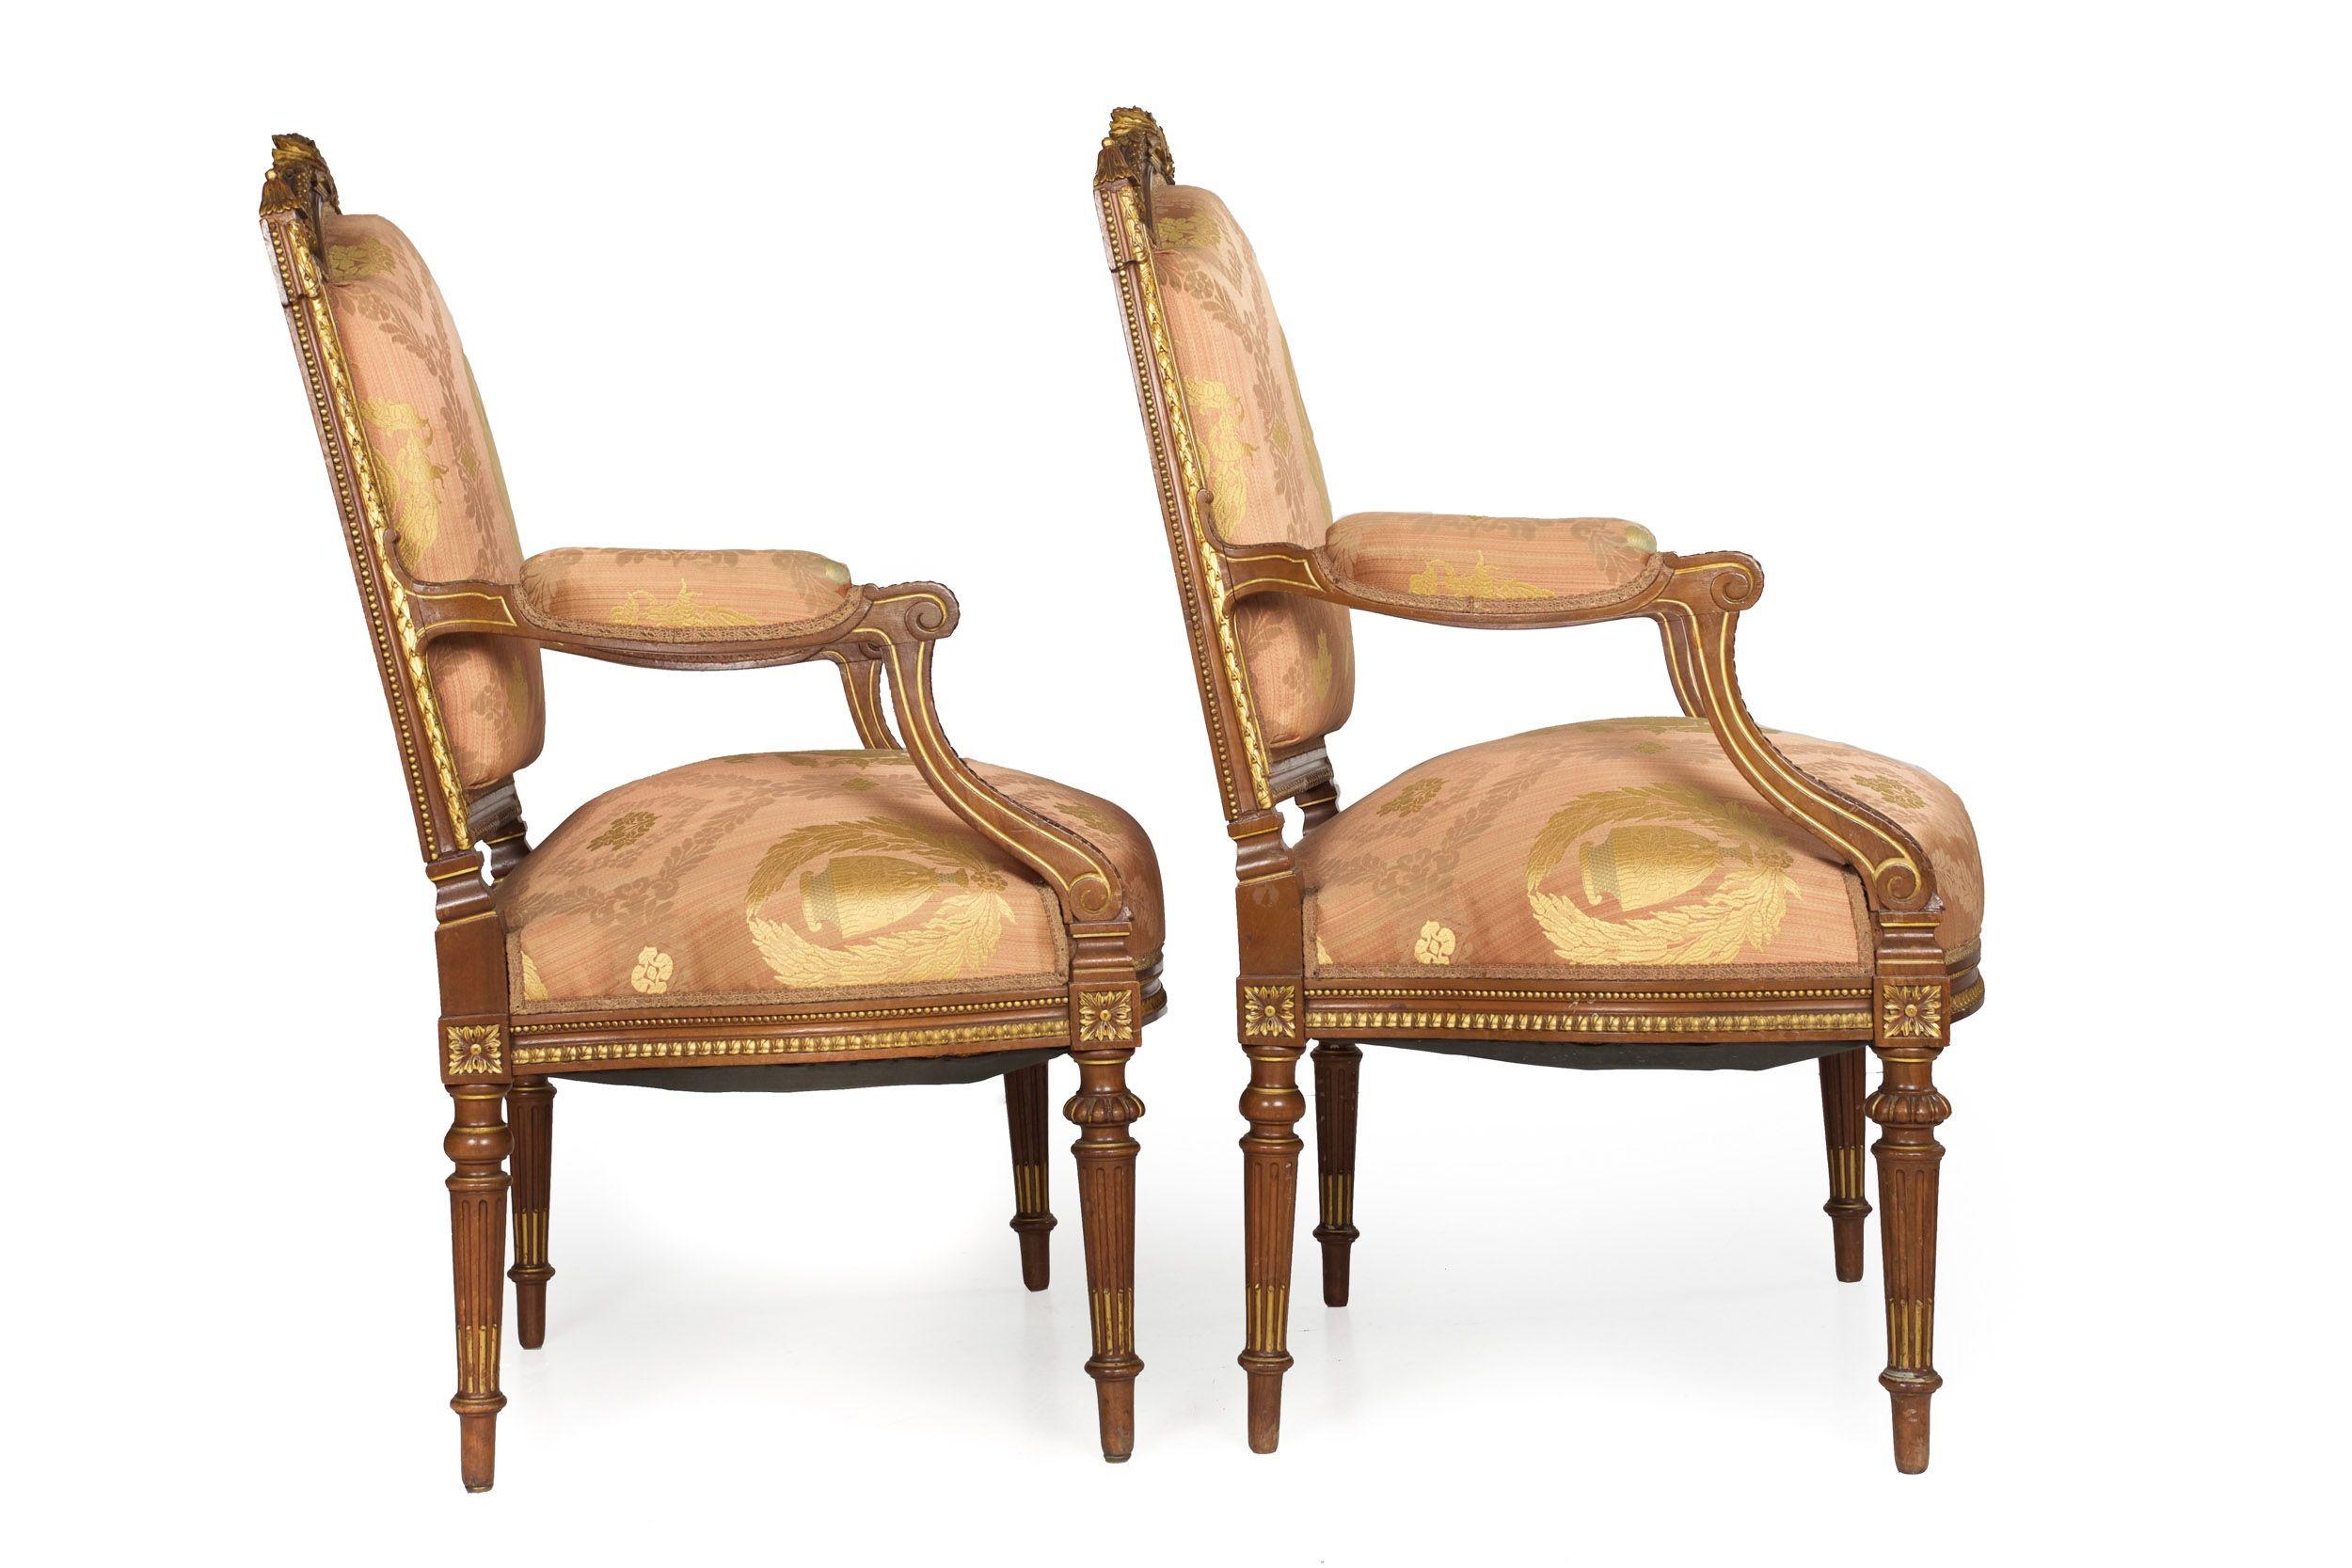 A good pair of early 20th century fauteuils in the Louis XVI taste, executed in France during the first quarter of the century, they exhibit solid walnut surfaces that have been carved and turned in the manner typical of the Belle Époque: a